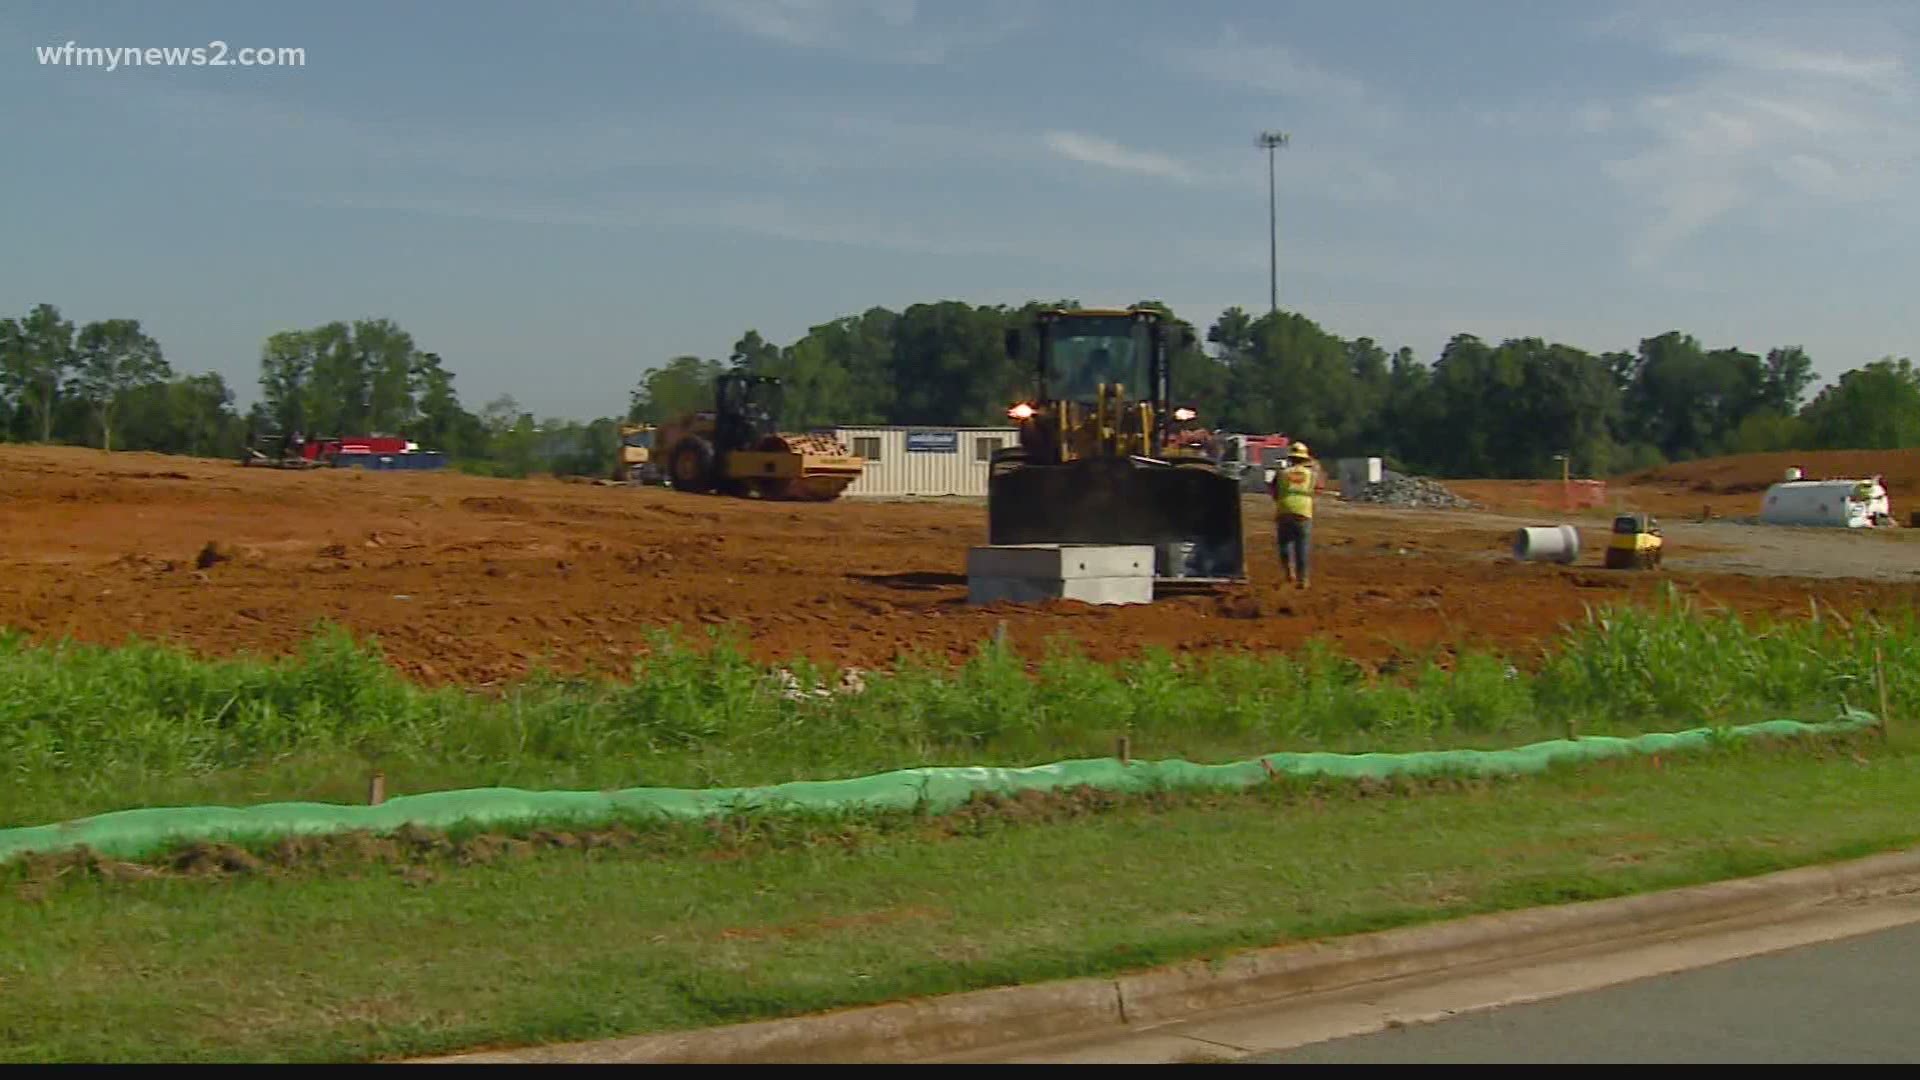 This will be the third Amazon facility built in the Triad within the last year. The others are in Colfax and Kernersville.